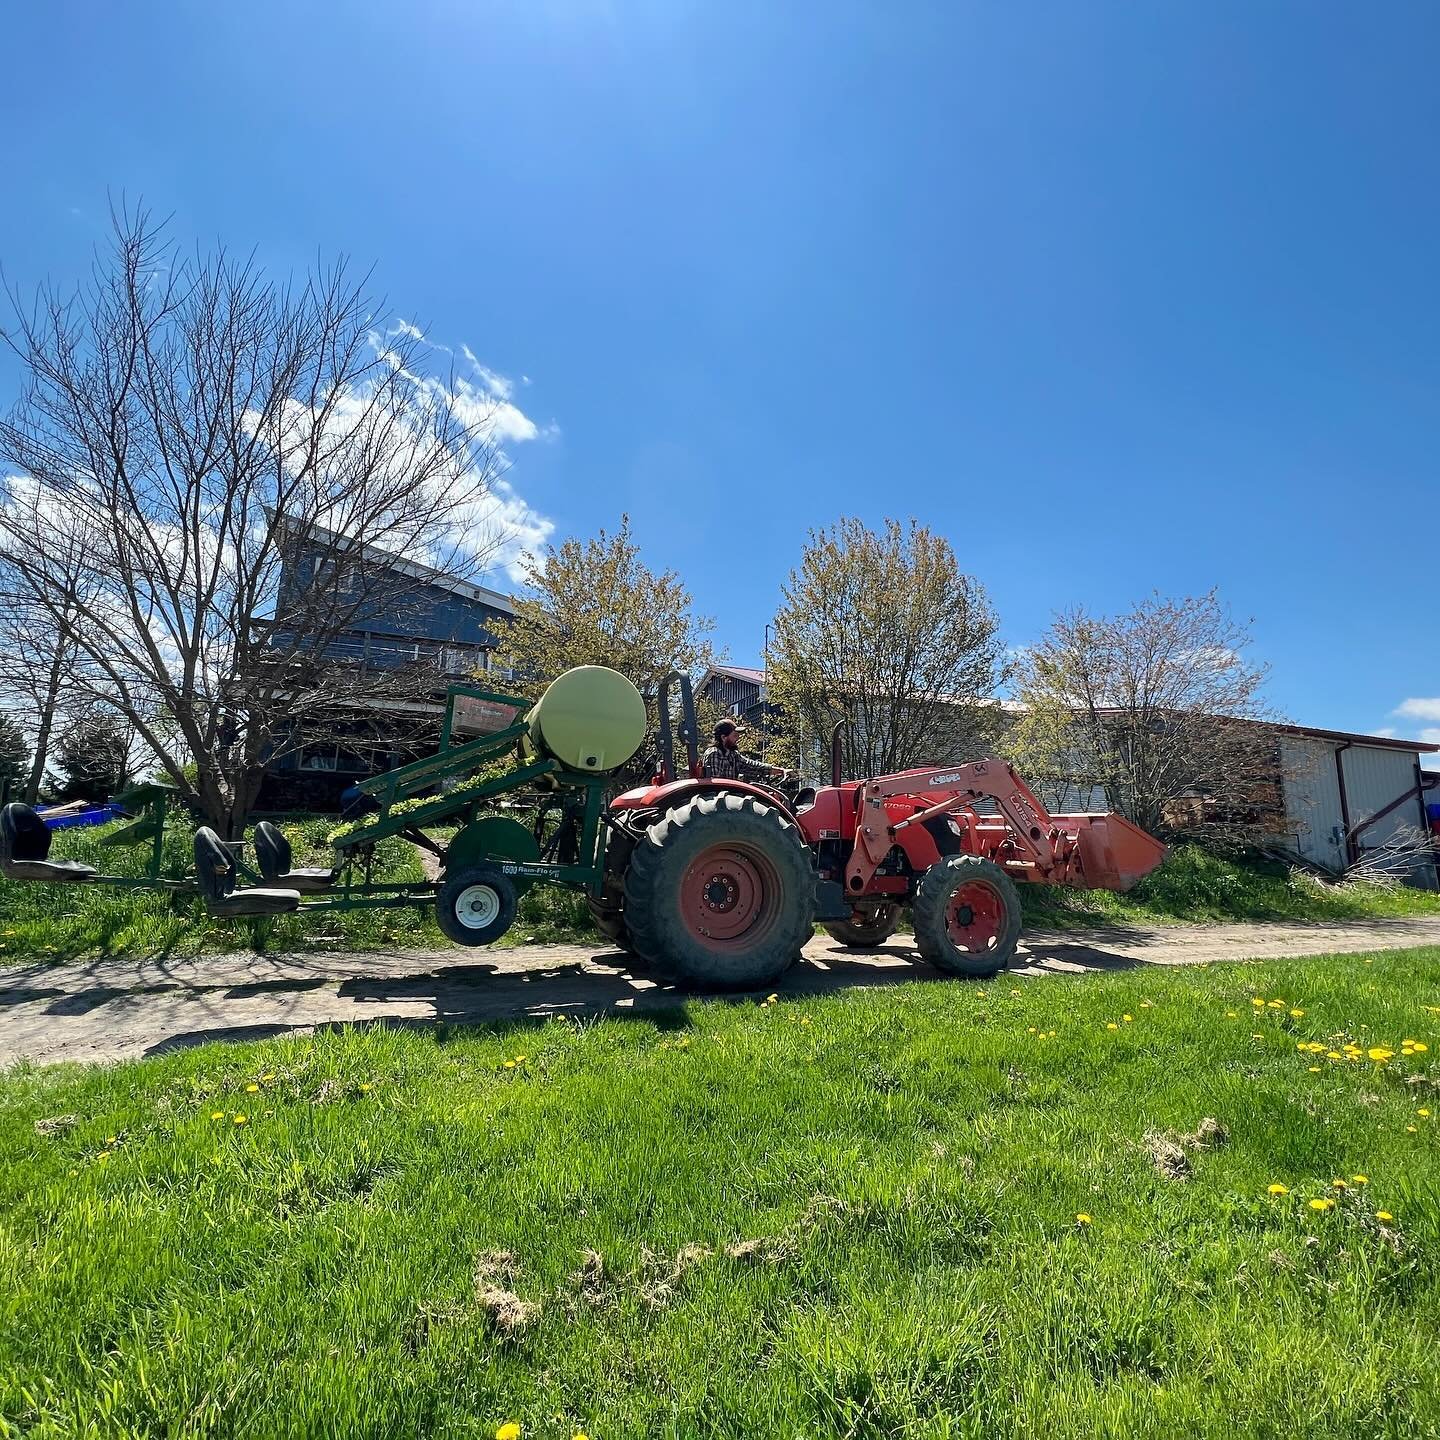 The crew at @stickandstonefarm ready to put some transplants in the field on a sunny May Day ☀️ 

Carrie, Jesse, Michael and Abby have been holding down the fort through the off season, and the rest of the crew will be arriving any day now 🧑&zwj;🌾 